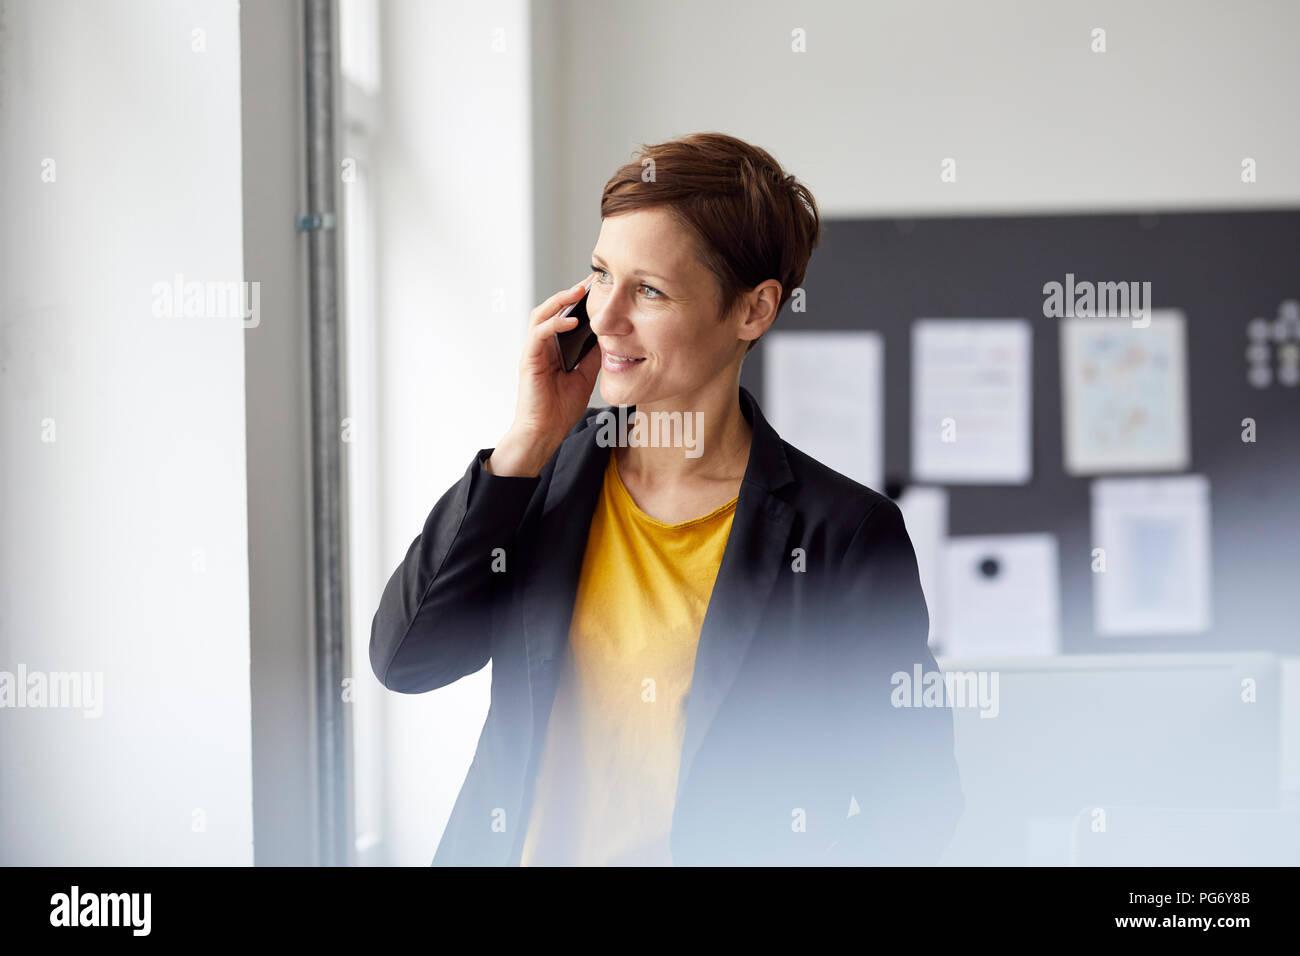 Attractive businesswoman standing in office, using smartphone Stock Photo